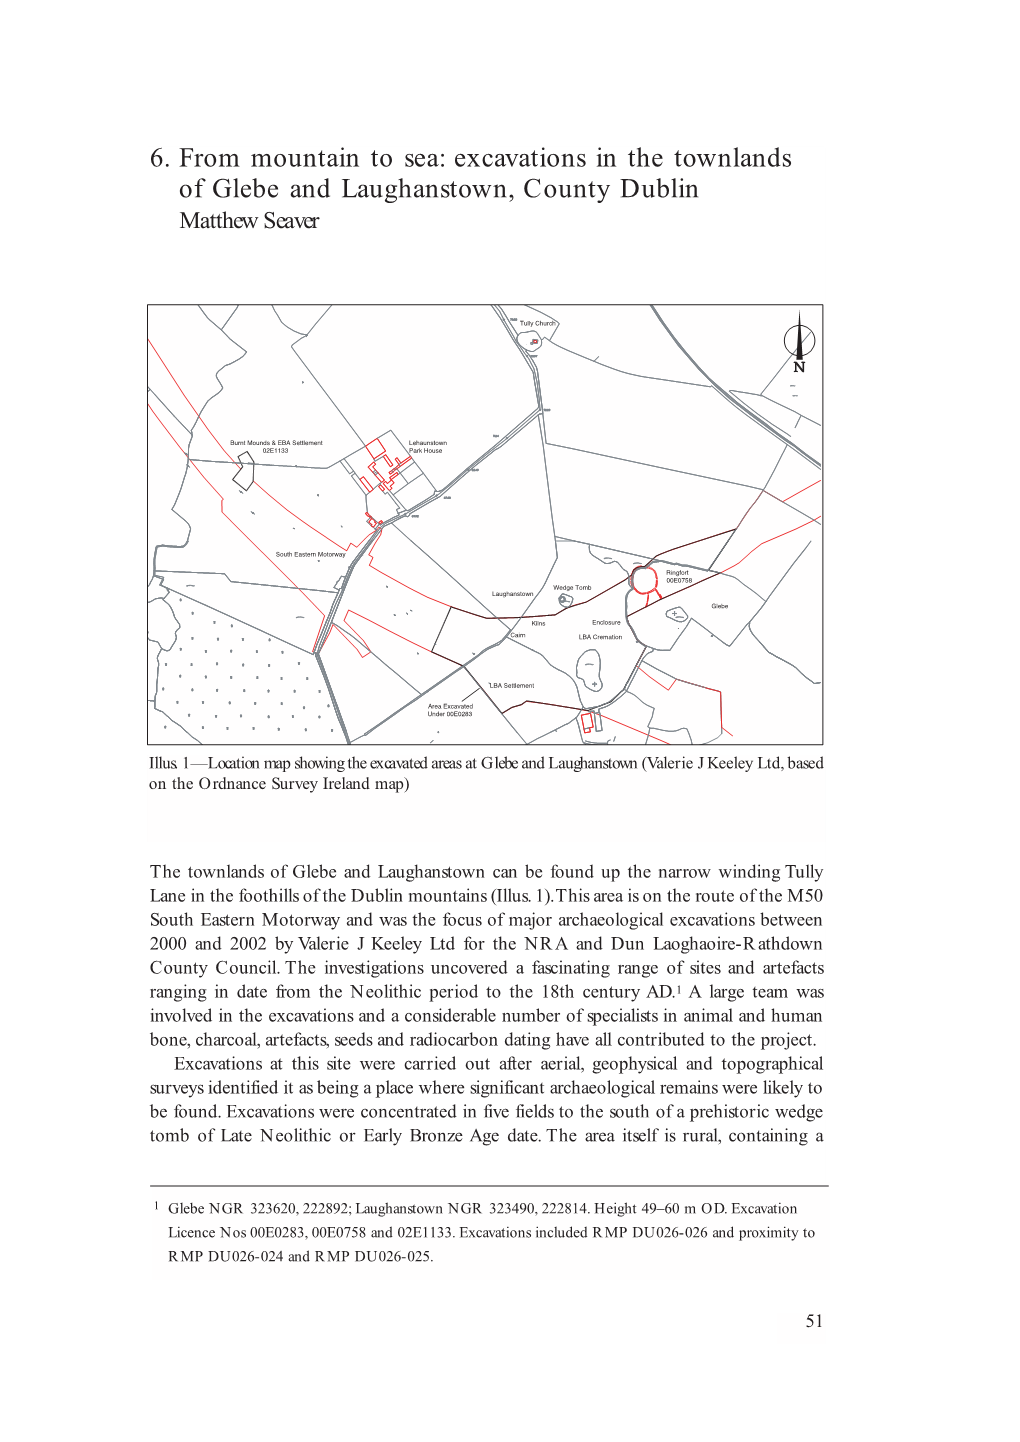 Excavations in the Townlands of Glebe and Laughanstown, County Dublin Matthew Seaver